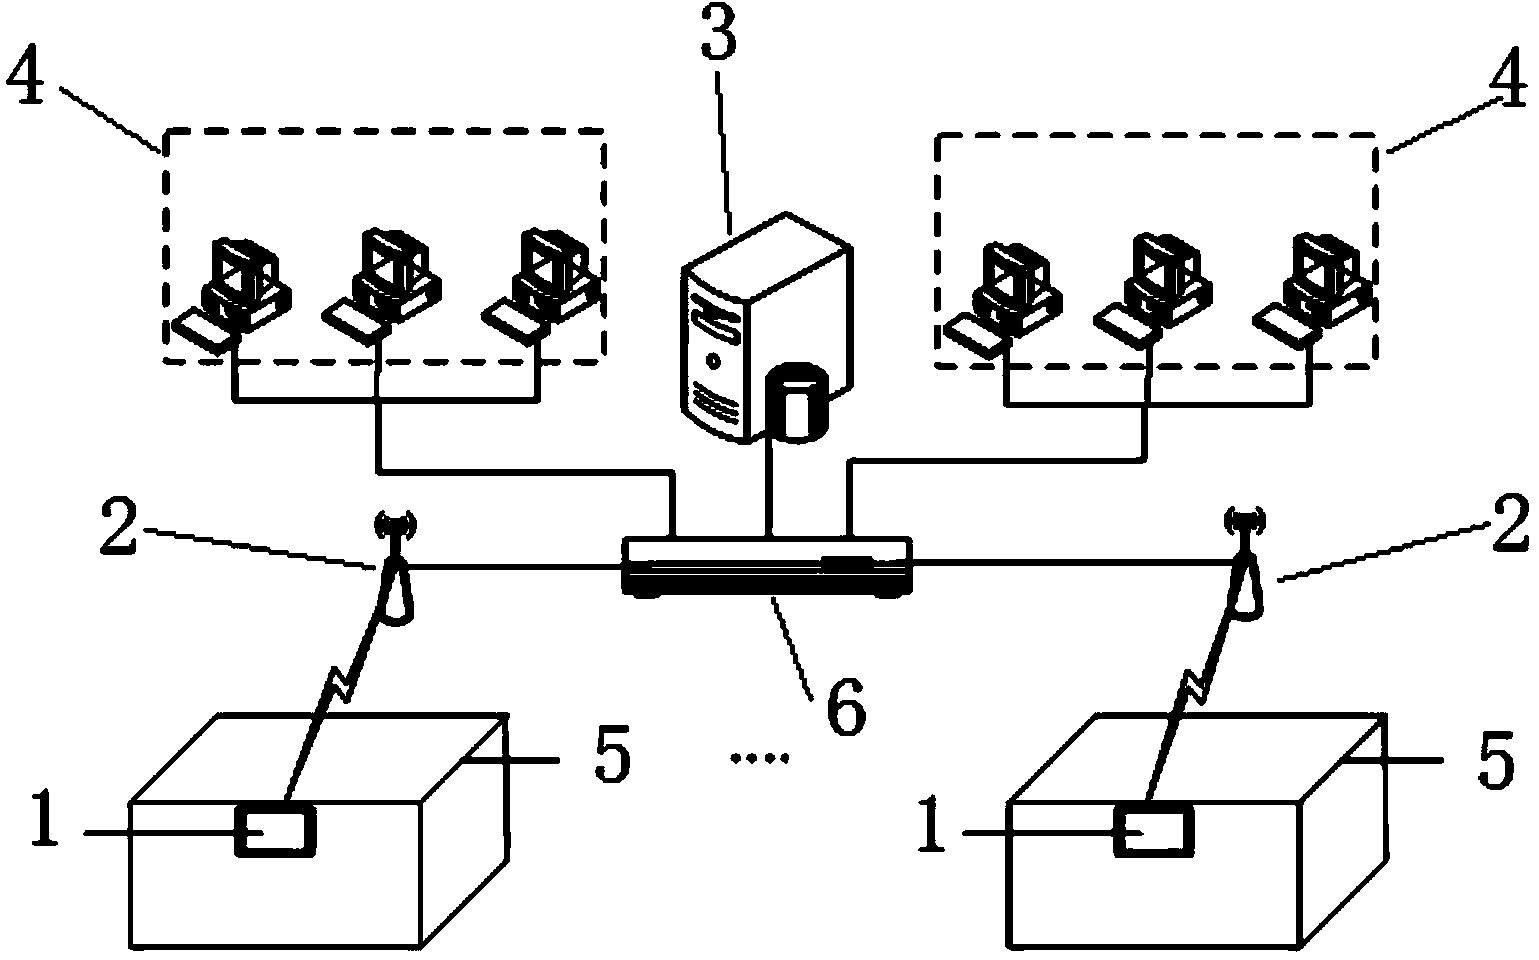 Wireless digital terminal based real-time monitoring system and method for machined work-in-process parts